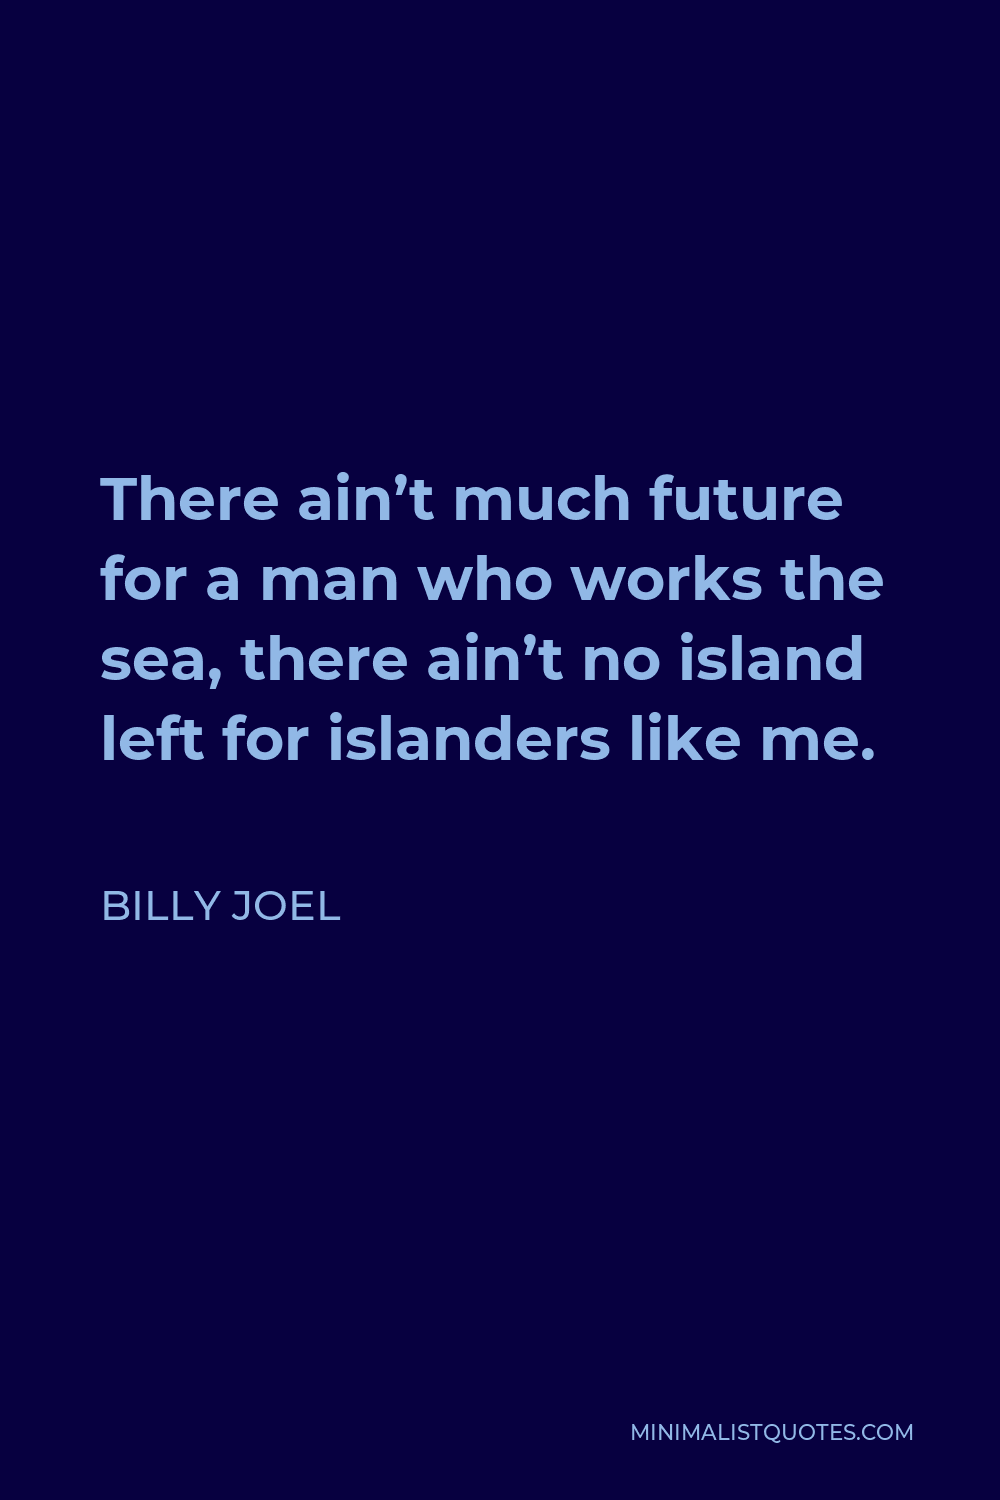 Billy Joel Quote - There ain’t much future for a man who works the sea, there ain’t no island left for islanders like me.